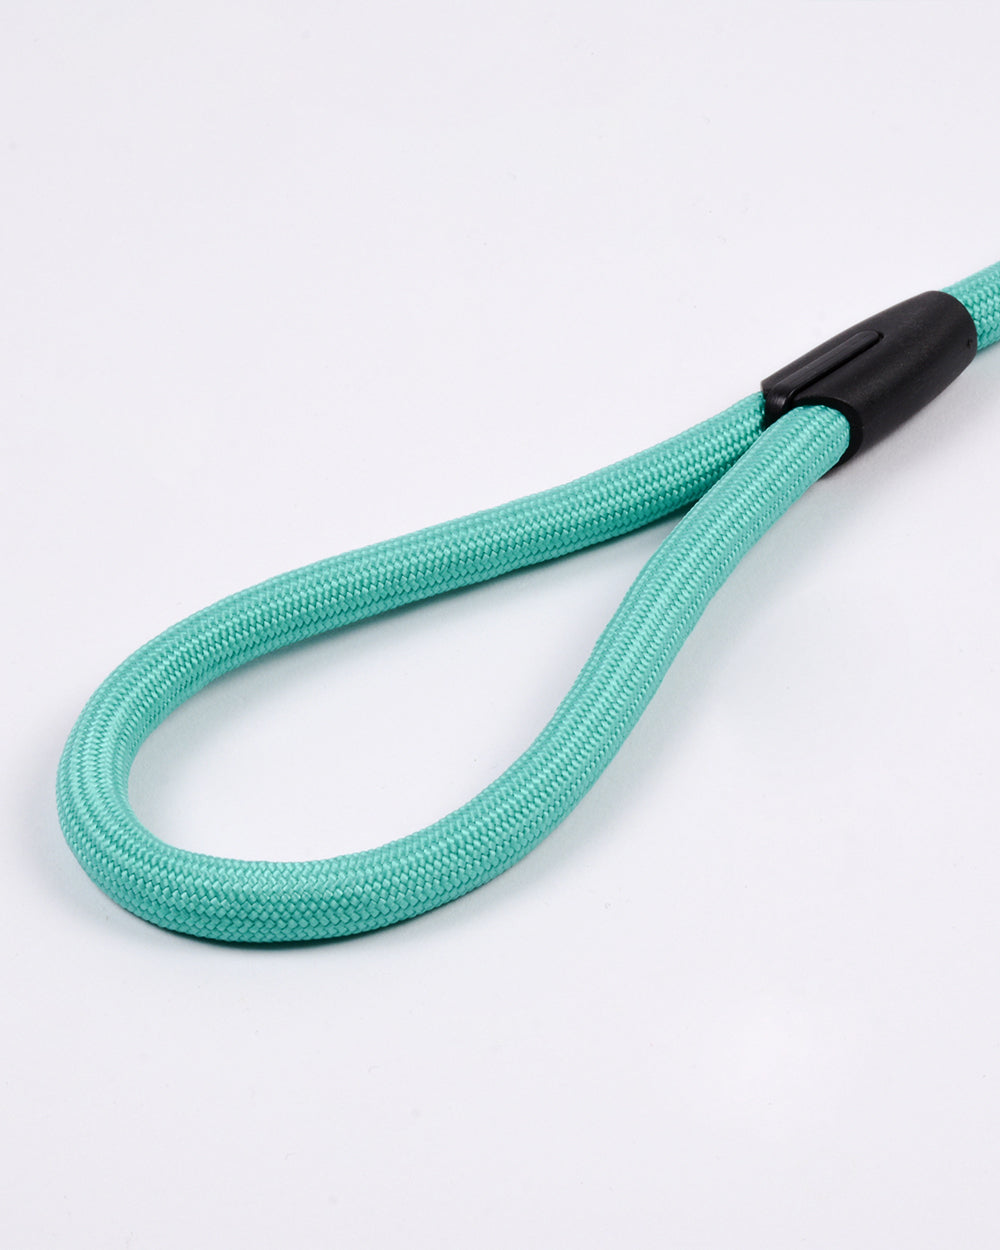 Nylon Rope and Ball Tug Toy With Loop - Orange Green